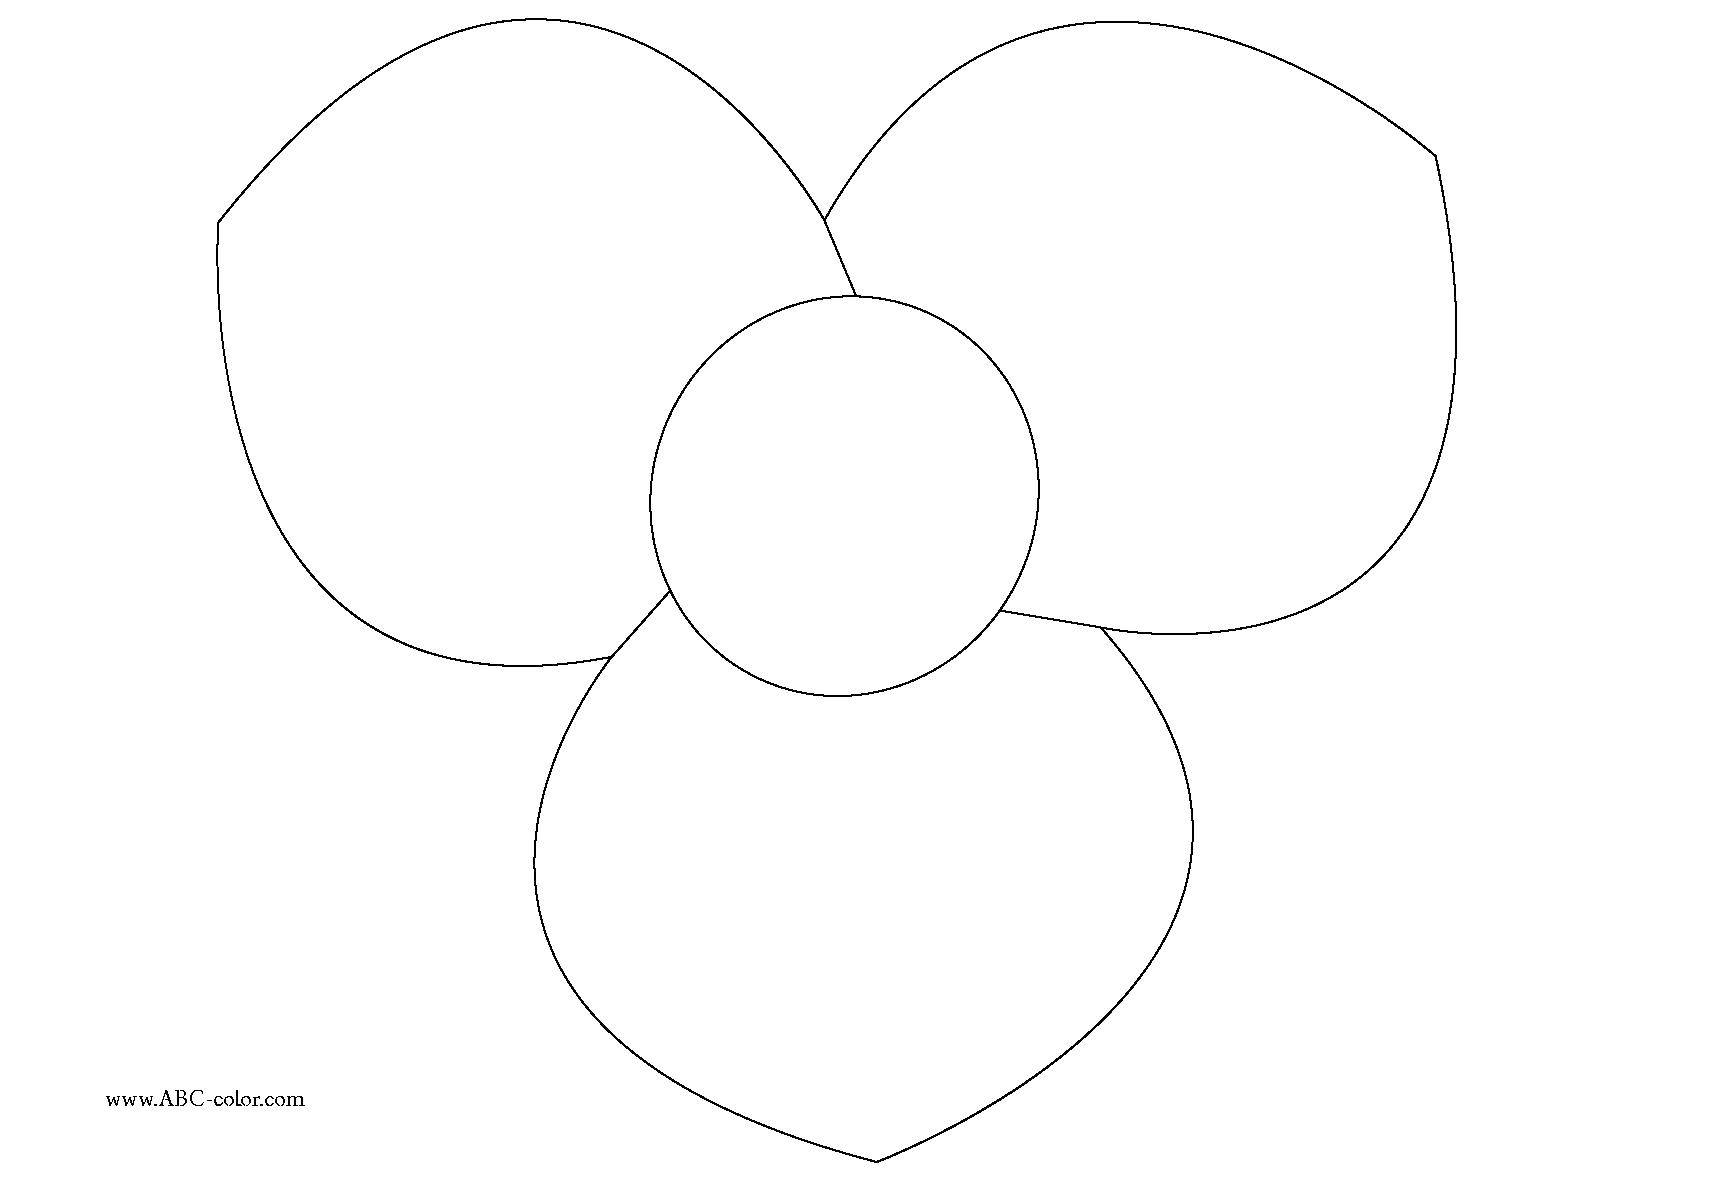 Coloring Three petals. Category flowers. Tags:  flowers, flowers, petals.